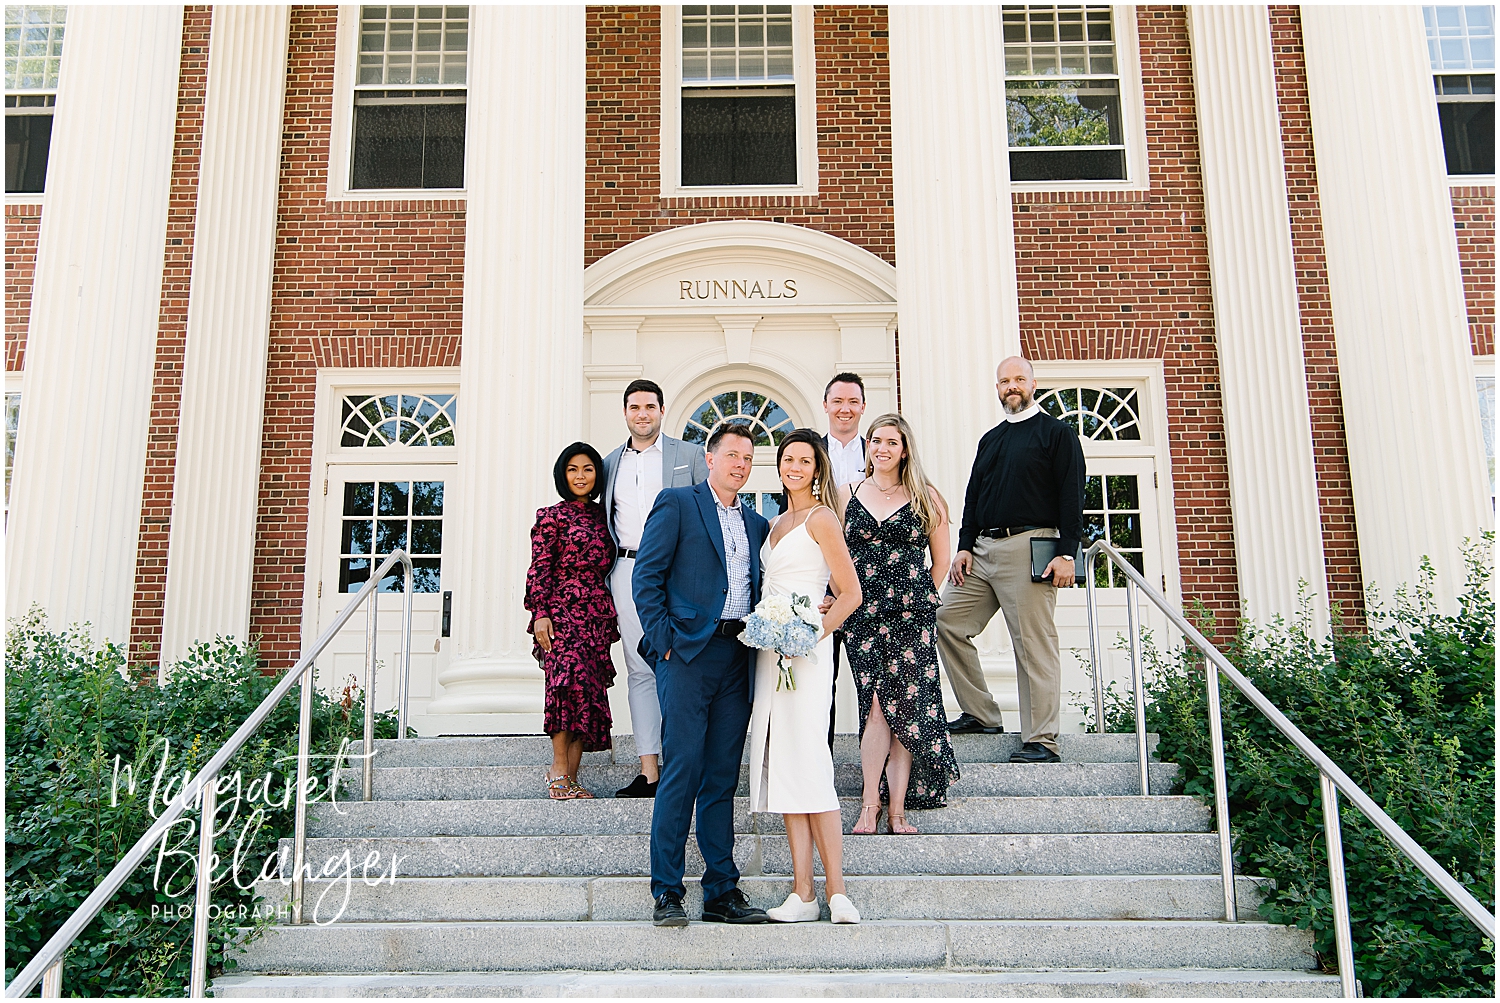 A bride and groom and their five wedding guests posing on the steps of a building named "Runnals".